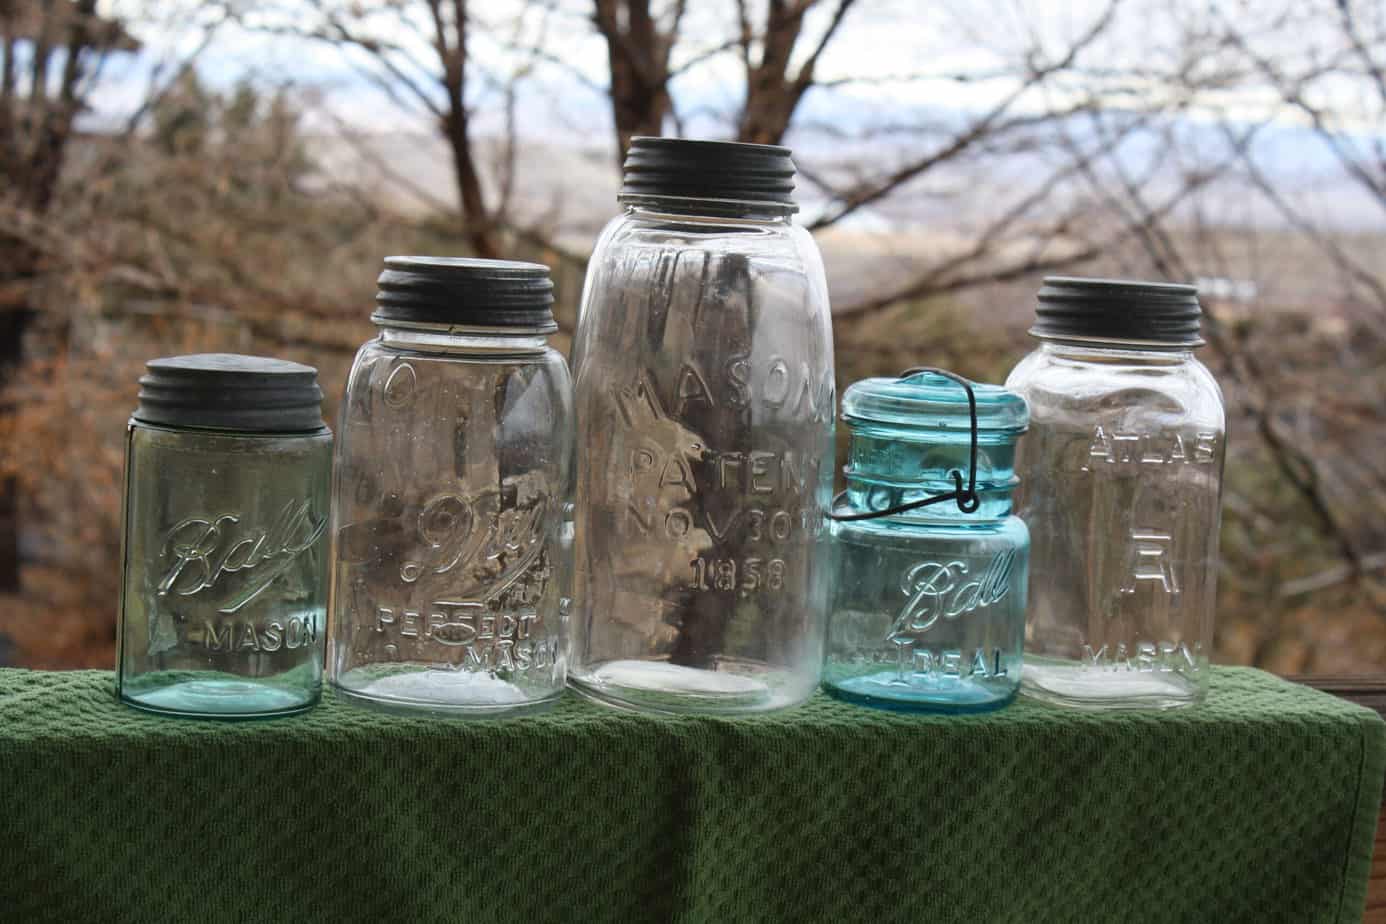 https://www.simplycanning.com/wp-content/uploads/antique-canning-jars2-scaled.jpg